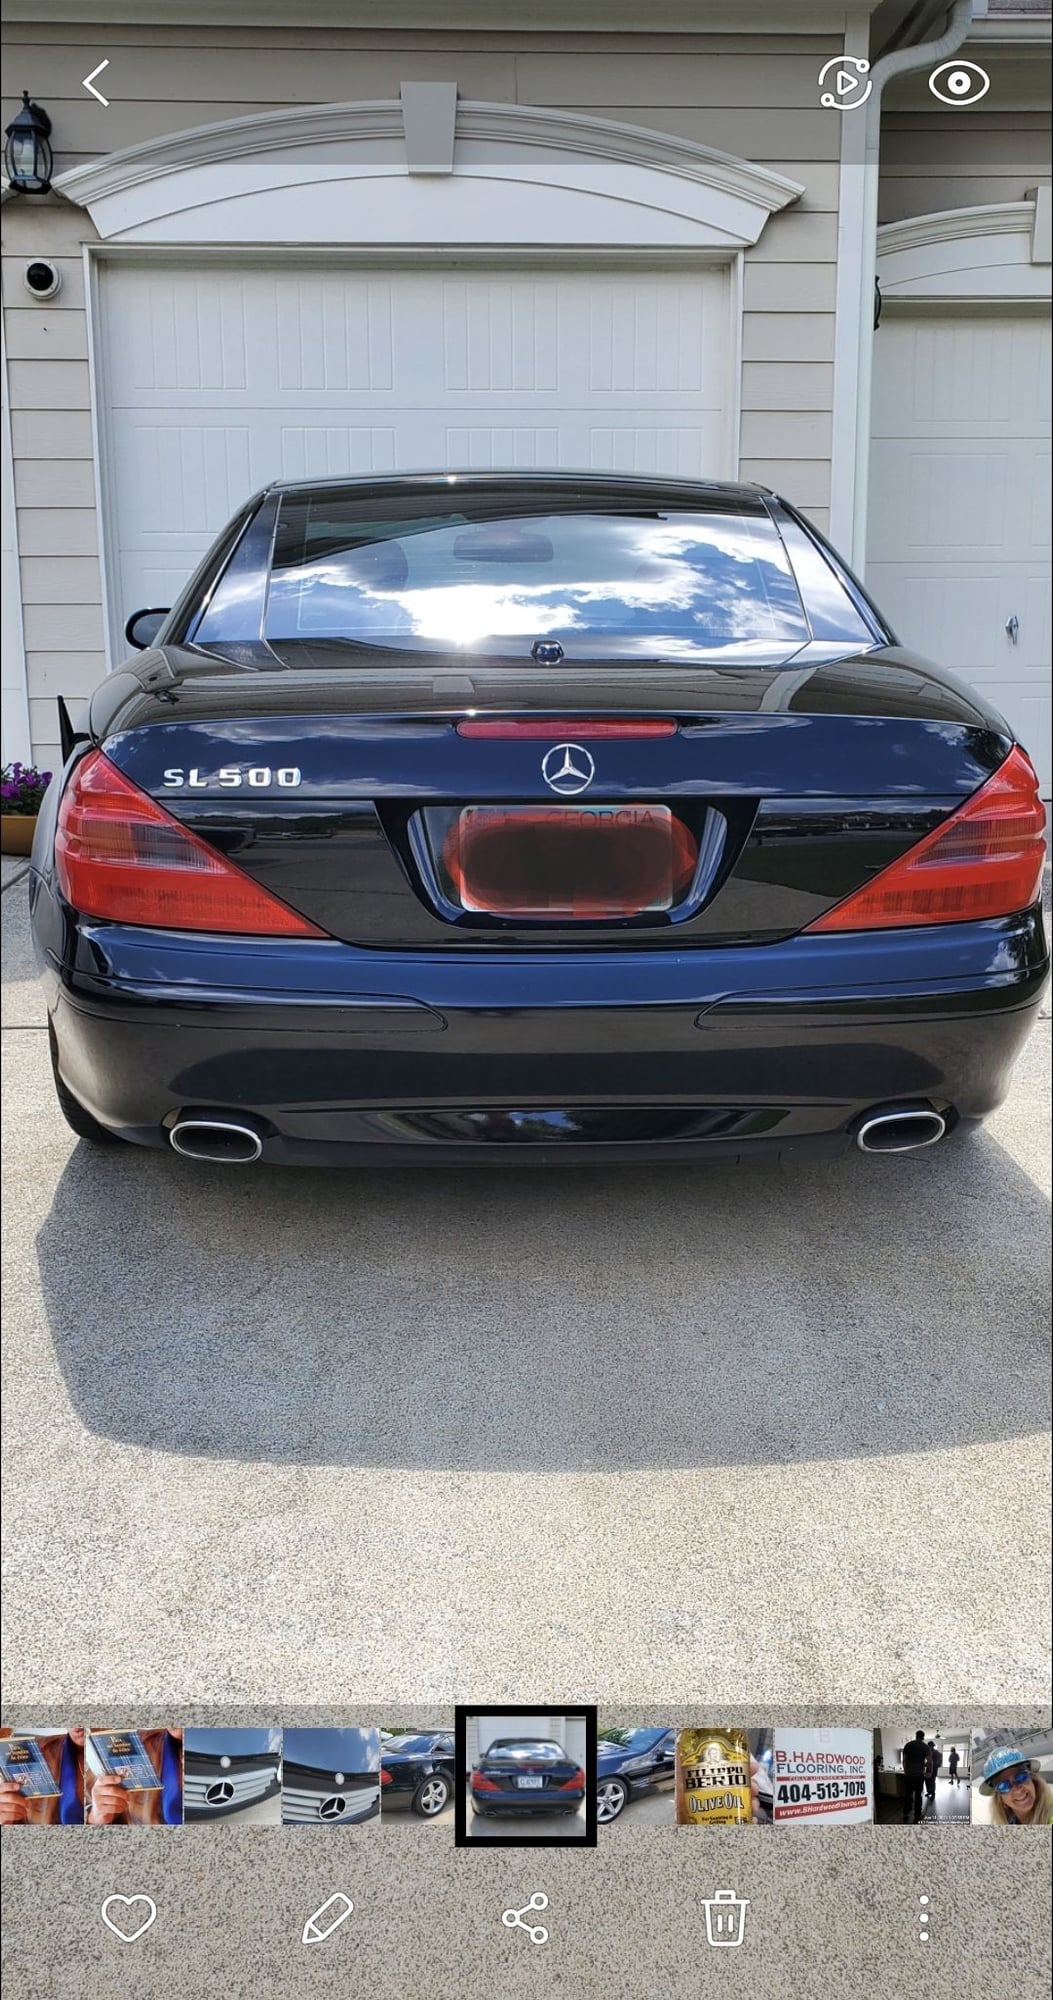 2006 Mercedes-Benz SL500 - 2006 SL 500 - Used - VIN WDBSK75F26F108312 - 87,025 Miles - 8 cyl - 2WD - Automatic - Convertible - Black - Cumming, GA 30040, United States